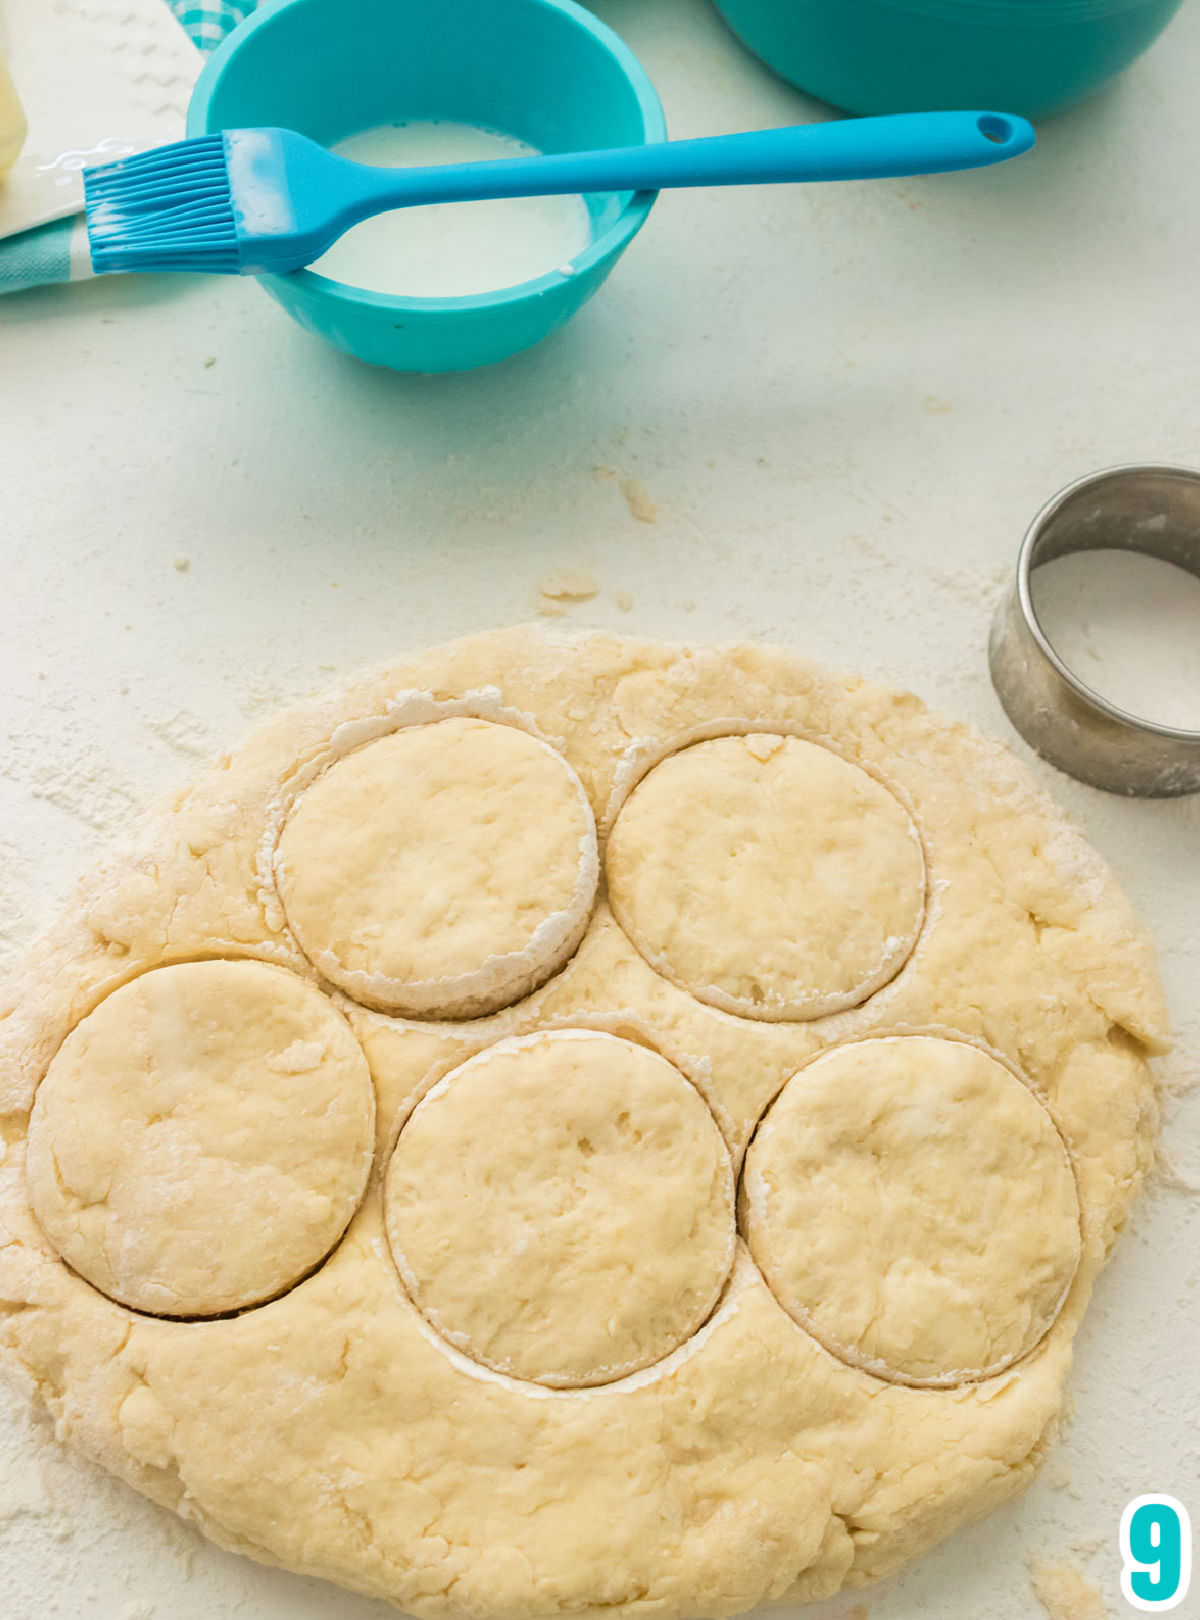 Closeup on a circle of Biscuit Dough pressed on a white table with a biscuit cutter and a small bowl filled with milk.